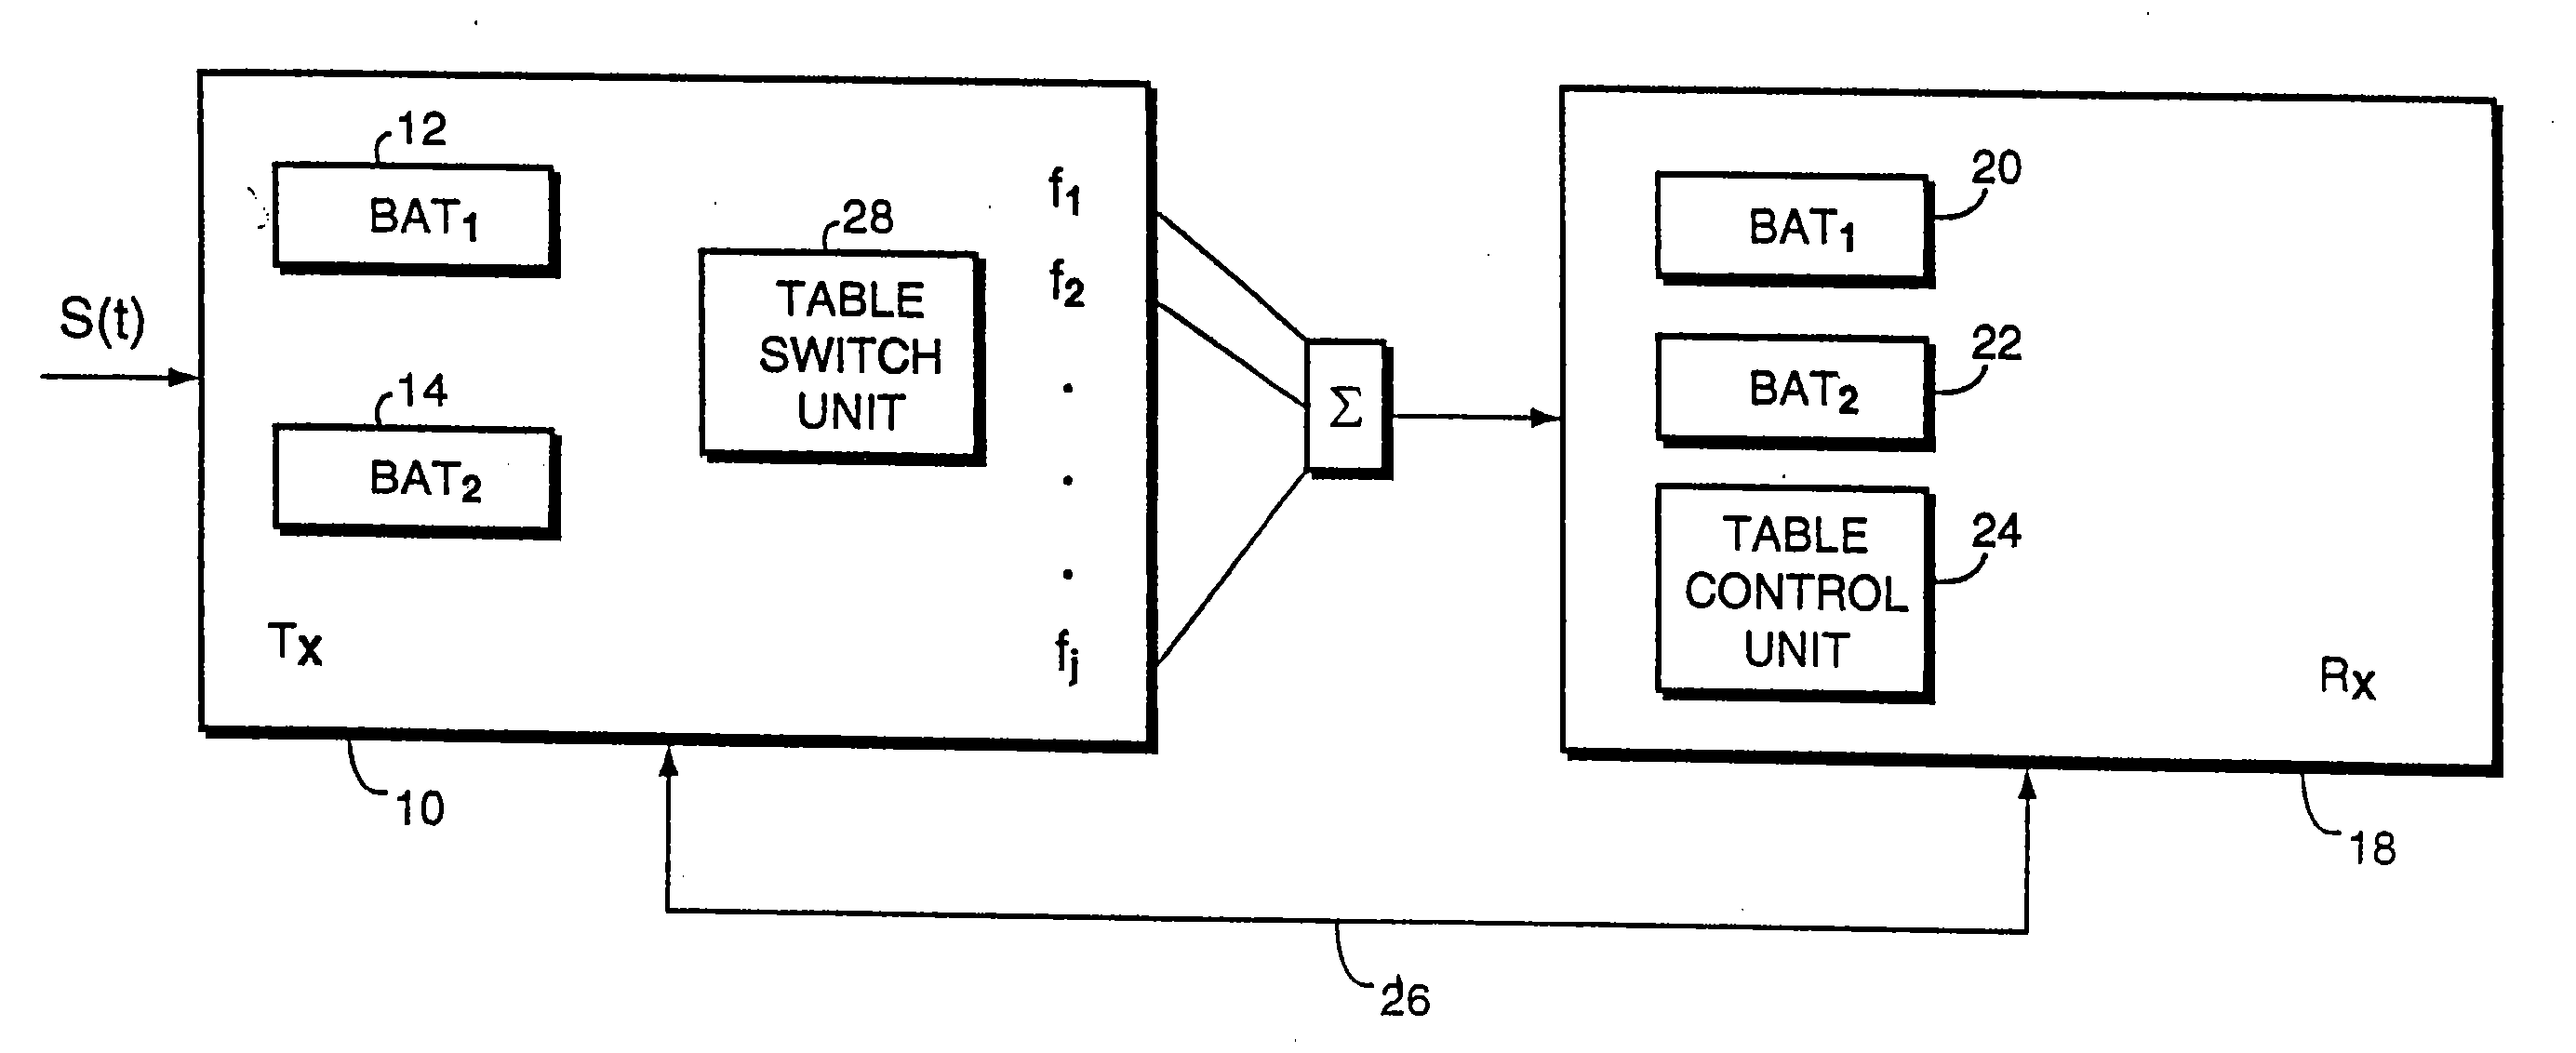 Adaptive Allocation For Variable Bandwidth Multicarrier Communication